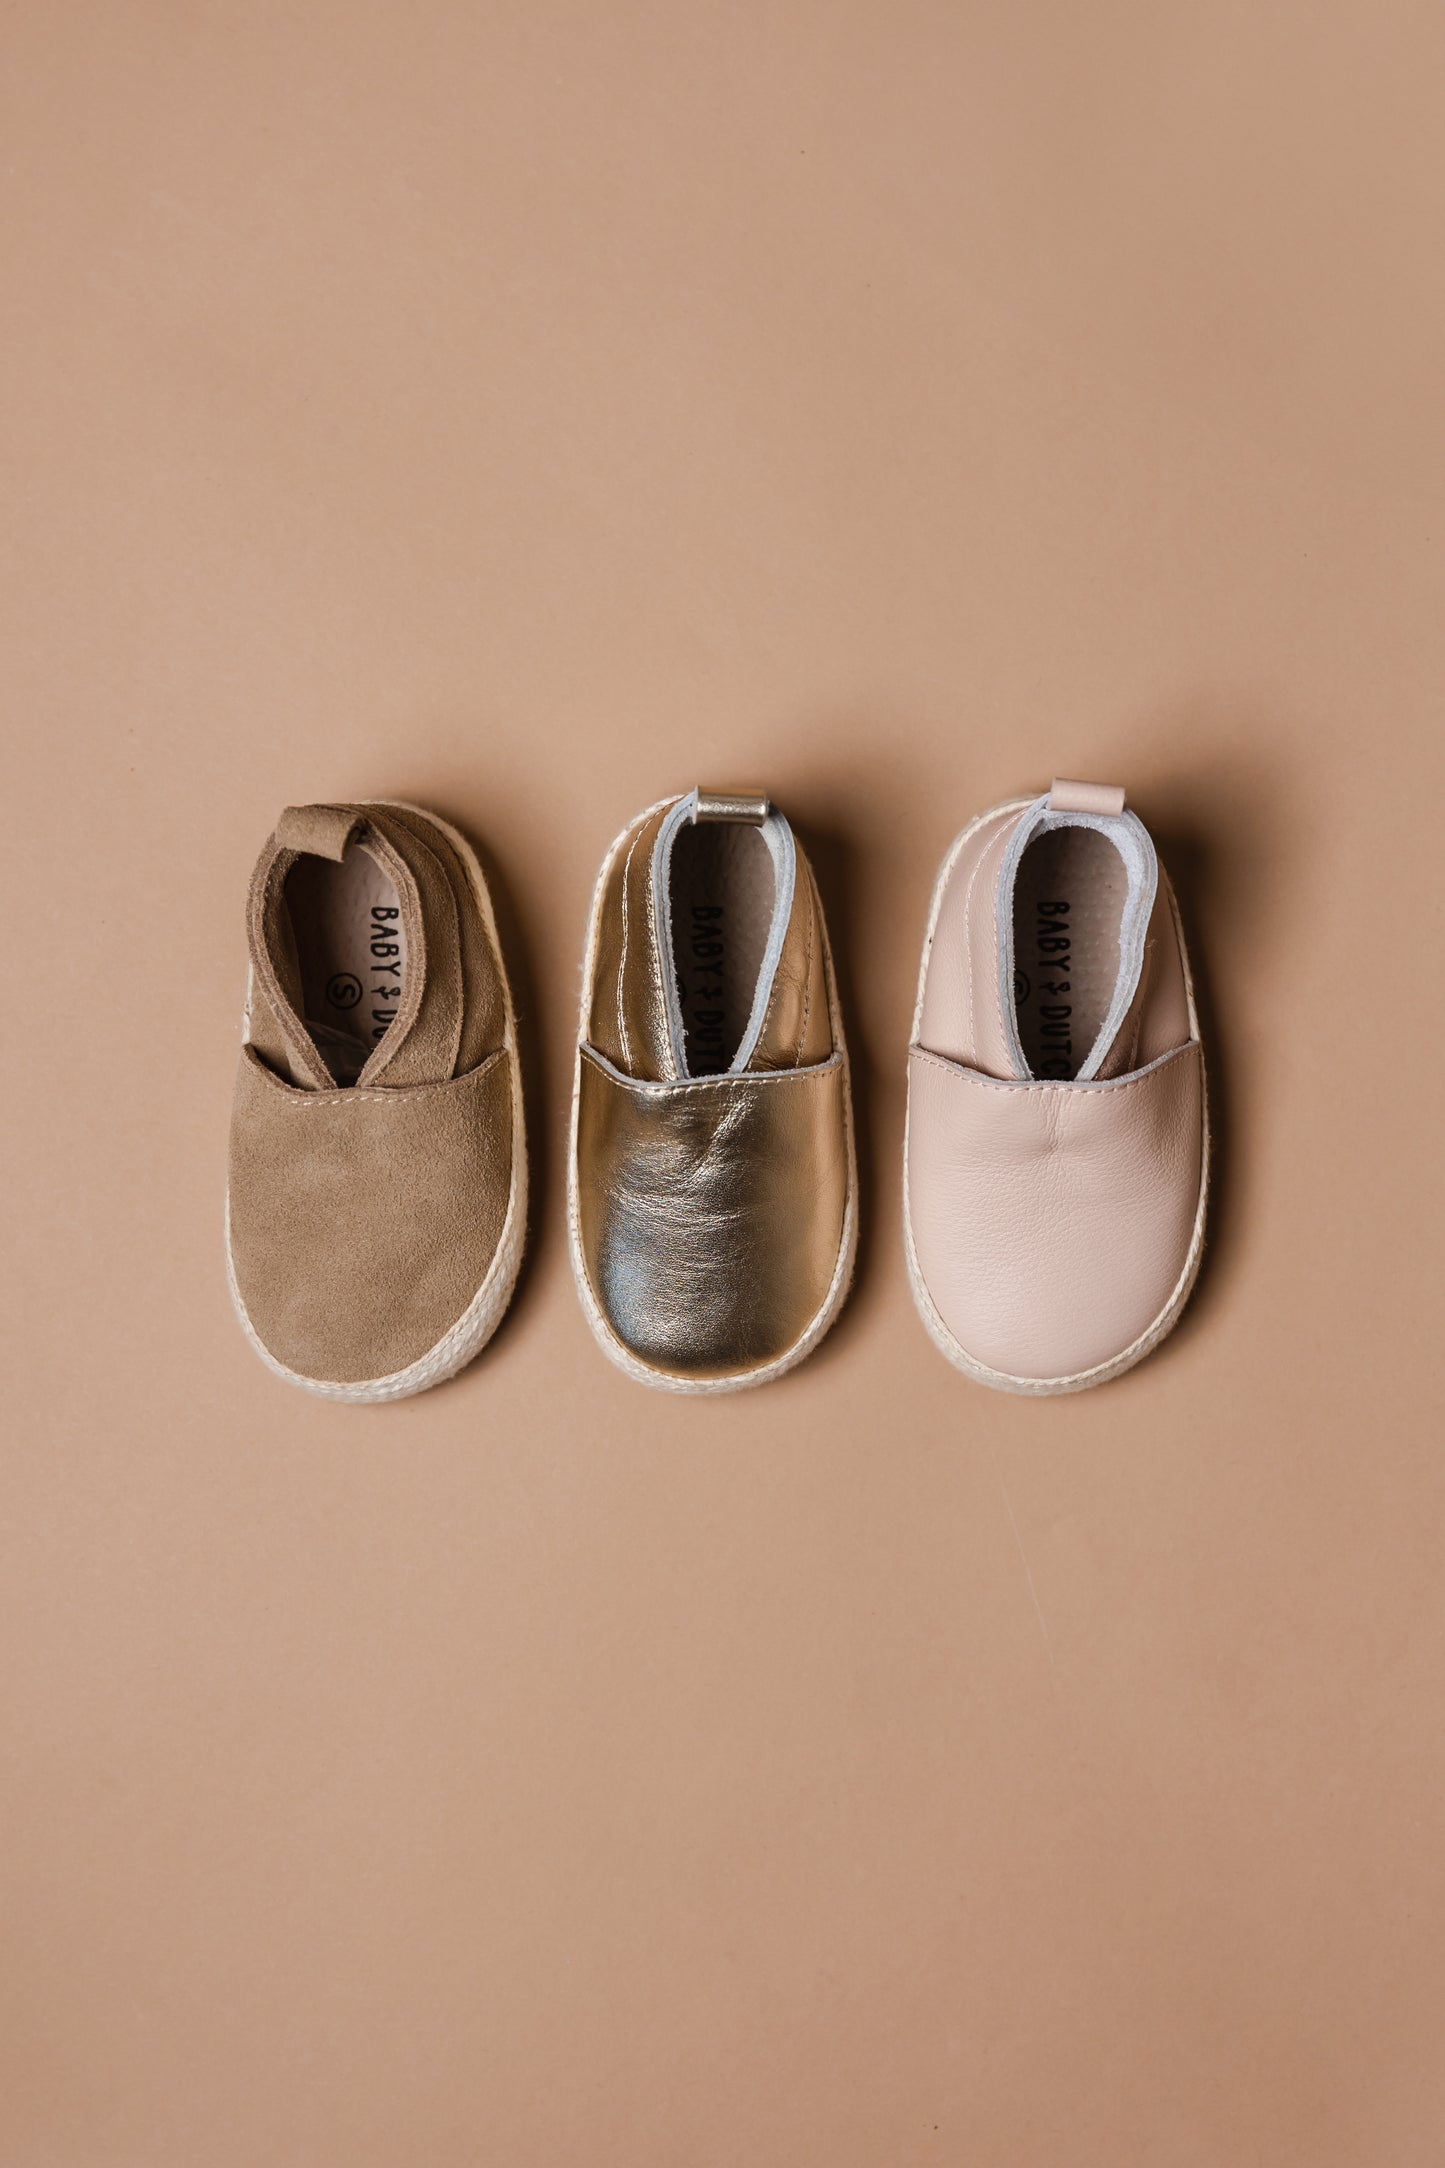 Lou | Babyshoes | Sand Suede